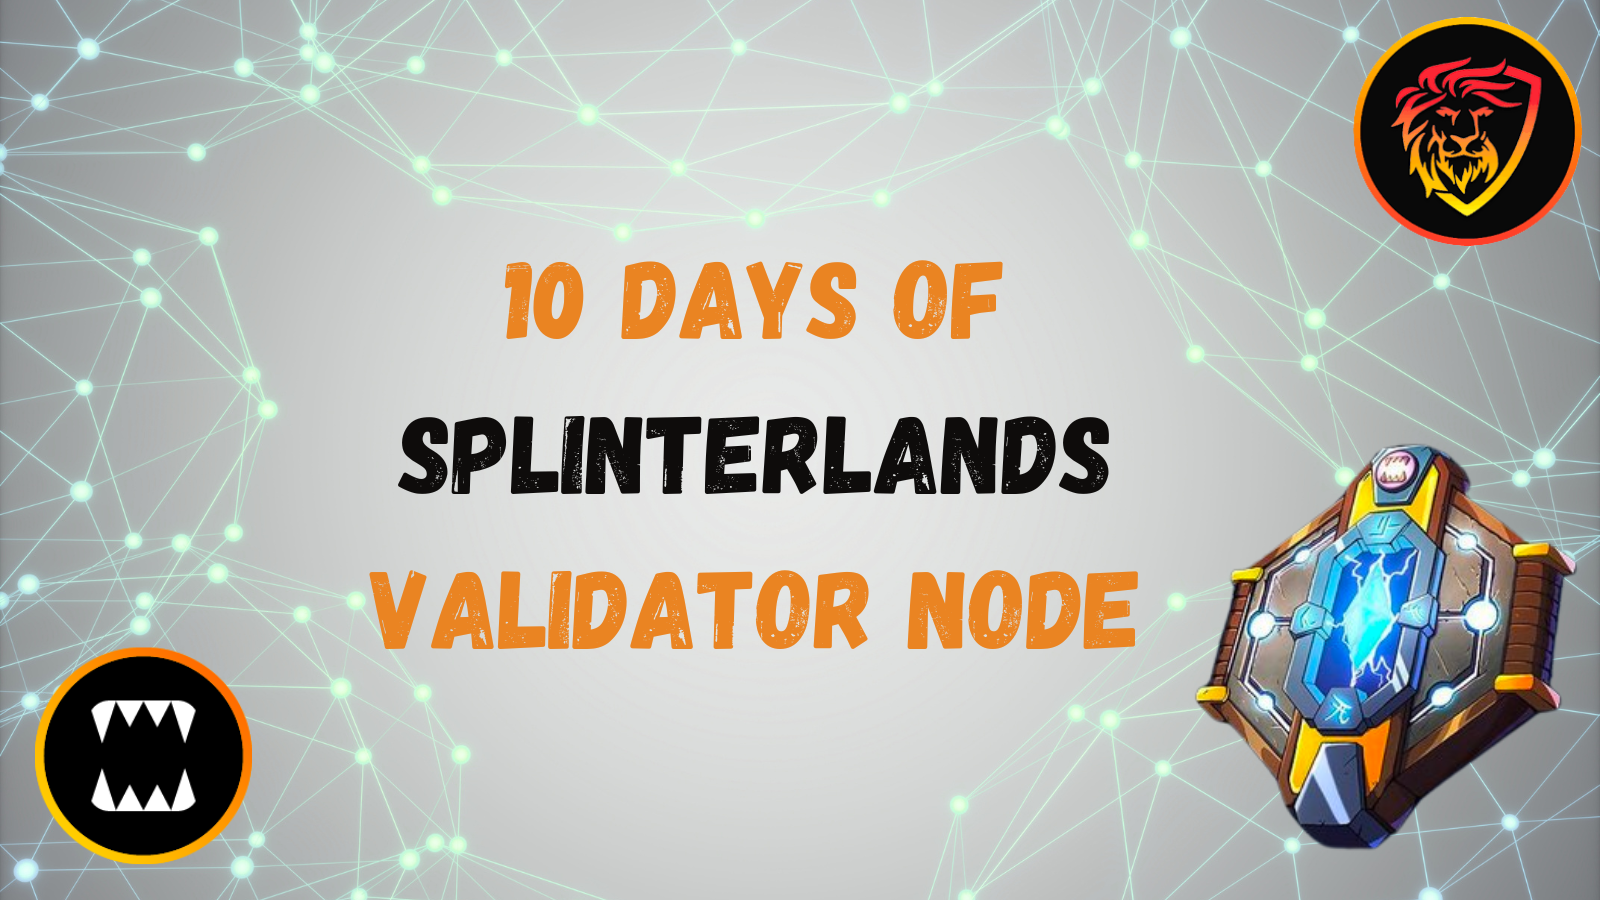 @idiosyncratic1/10-days-of-owning-a-splinterlands-validator-license